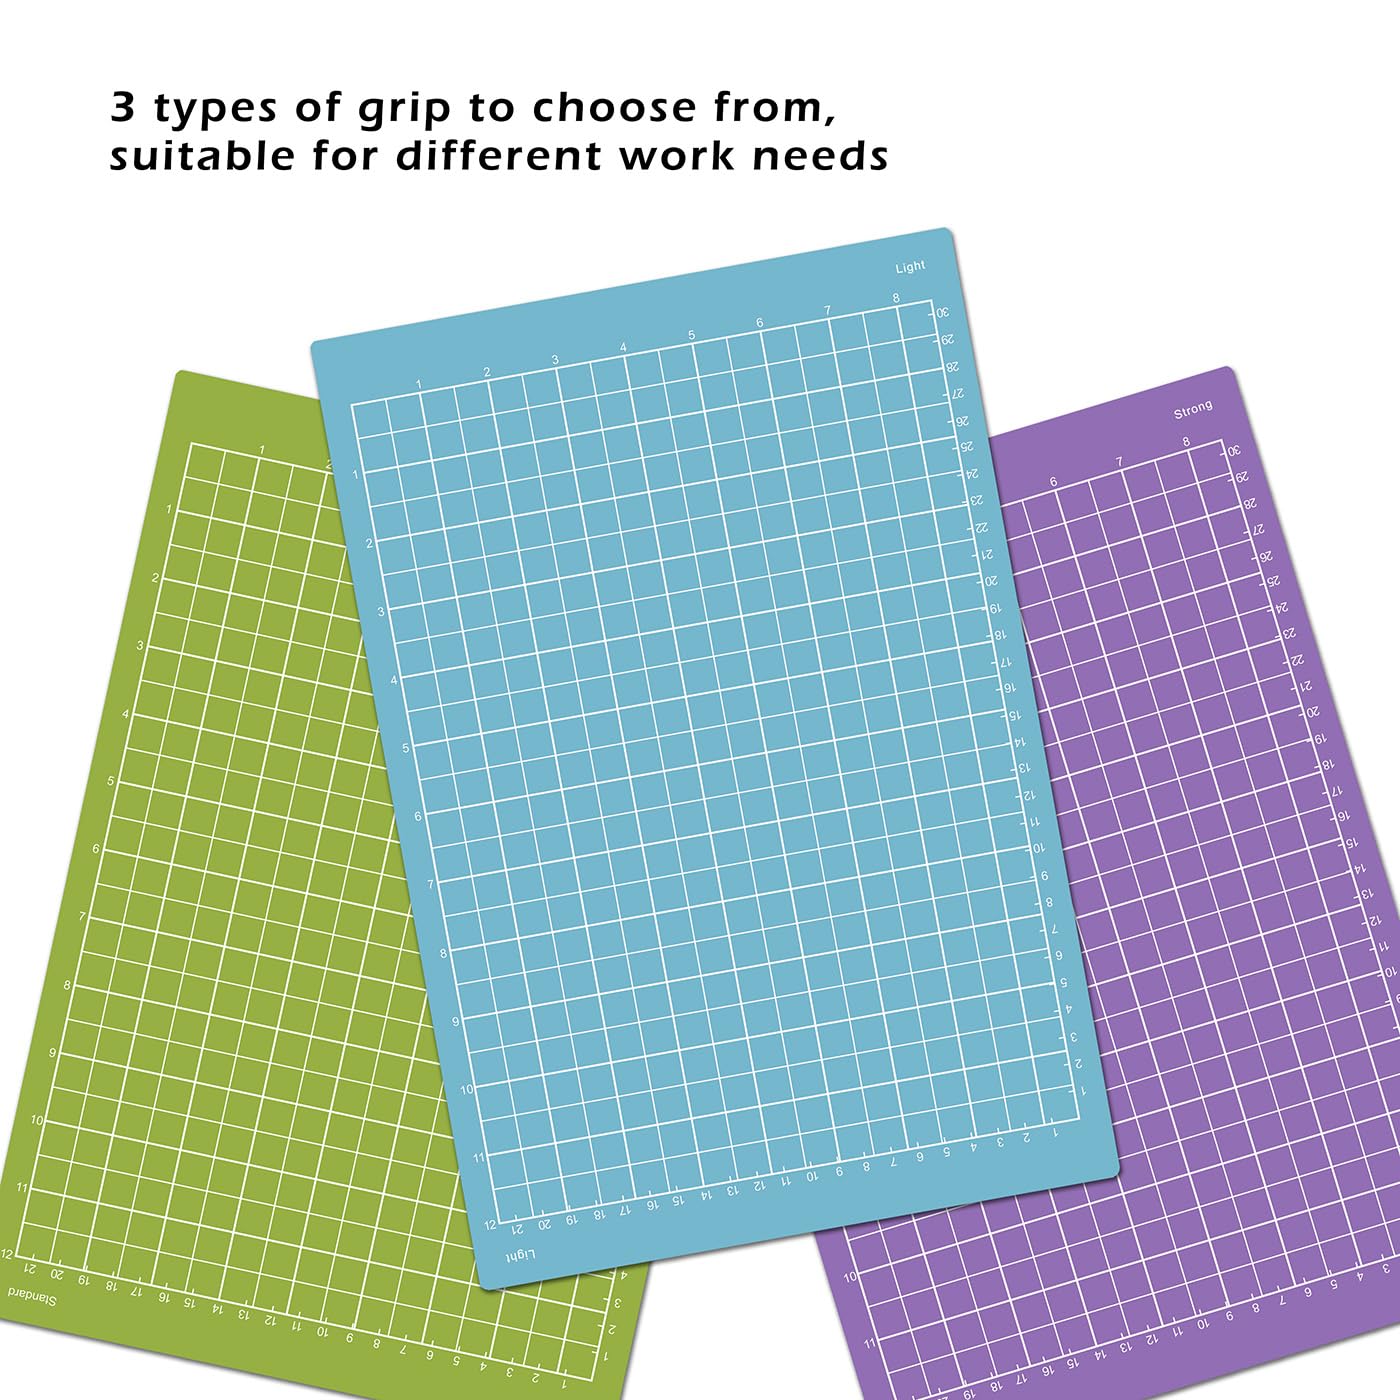 Cricut Light Grip Cutting Mat 8.5in x 12in, Reusable Cutting Mats for  Crafts, Use with Printer Paper, Vellum, Light Cardstock & More, Blue